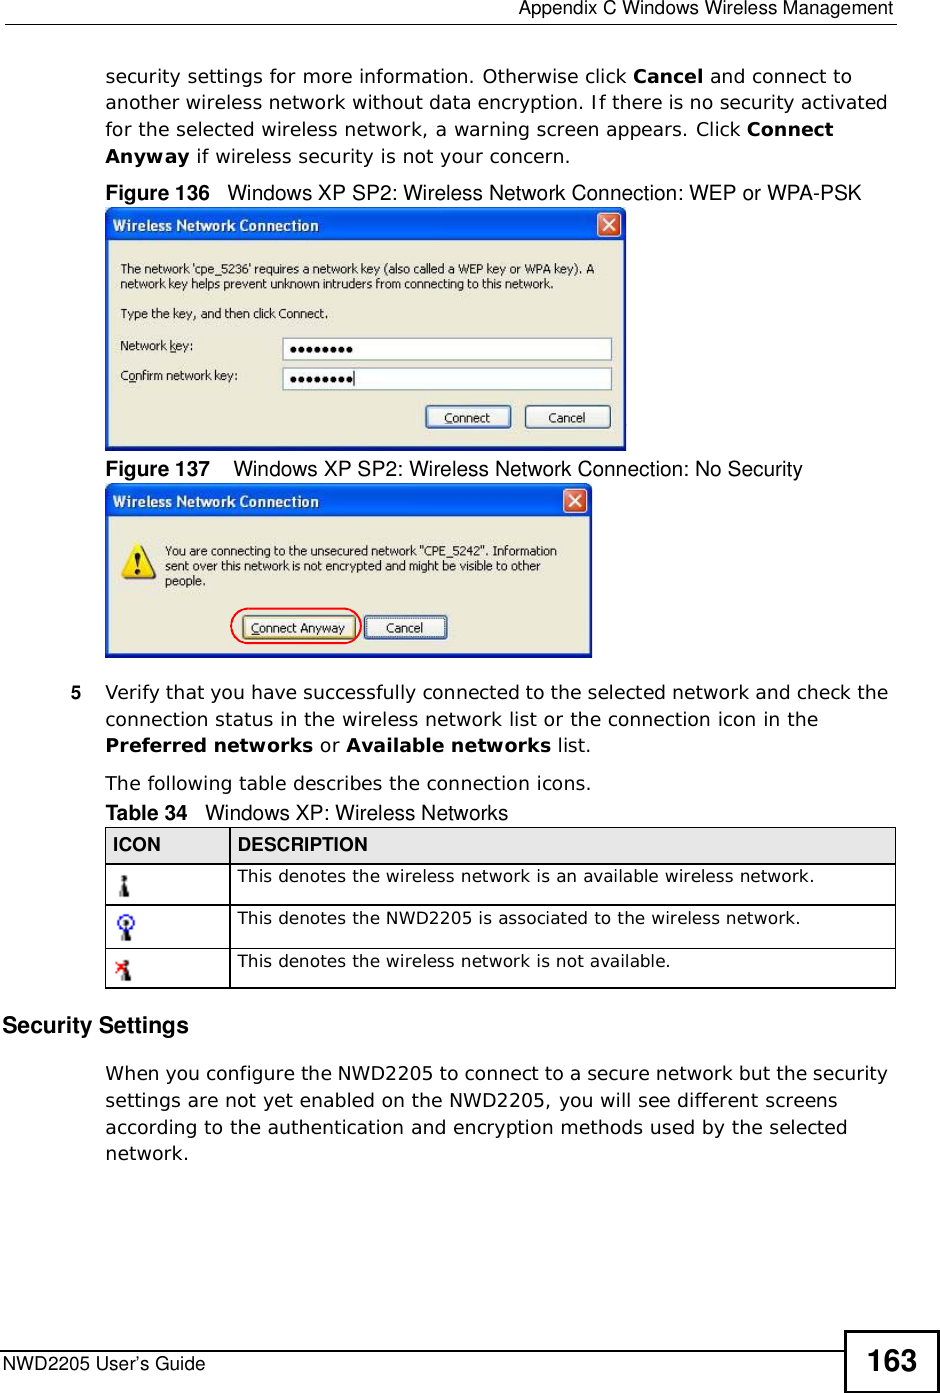  Appendix CWindows Wireless ManagementNWD2205 User’s Guide 163security settings for more information. Otherwise click Cancel and connect to another wireless network without data encryption. If there is no security activated for the selected wireless network, a warning screen appears. Click Connect Anyway if wireless security is not your concern.Figure 136   Windows XP SP2: Wireless Network Connection: WEP or WPA-PSKFigure 137    Windows XP SP2: Wireless Network Connection: No Security5Verify that you have successfully connected to the selected network and check the connection status in the wireless network list or the connection icon in the Preferred networks or Available networks list.The following table describes the connection icons.Security SettingsWhen you configure the NWD2205 to connect to a secure network but the security settings are not yet enabled on the NWD2205, you will see different screens according to the authentication and encryption methods used by the selected network.Table 34   Windows XP: Wireless NetworksICON DESCRIPTIONThis denotes the wireless network is an available wireless network.This denotes the NWD2205 is associated to the wireless network.This denotes the wireless network is not available.